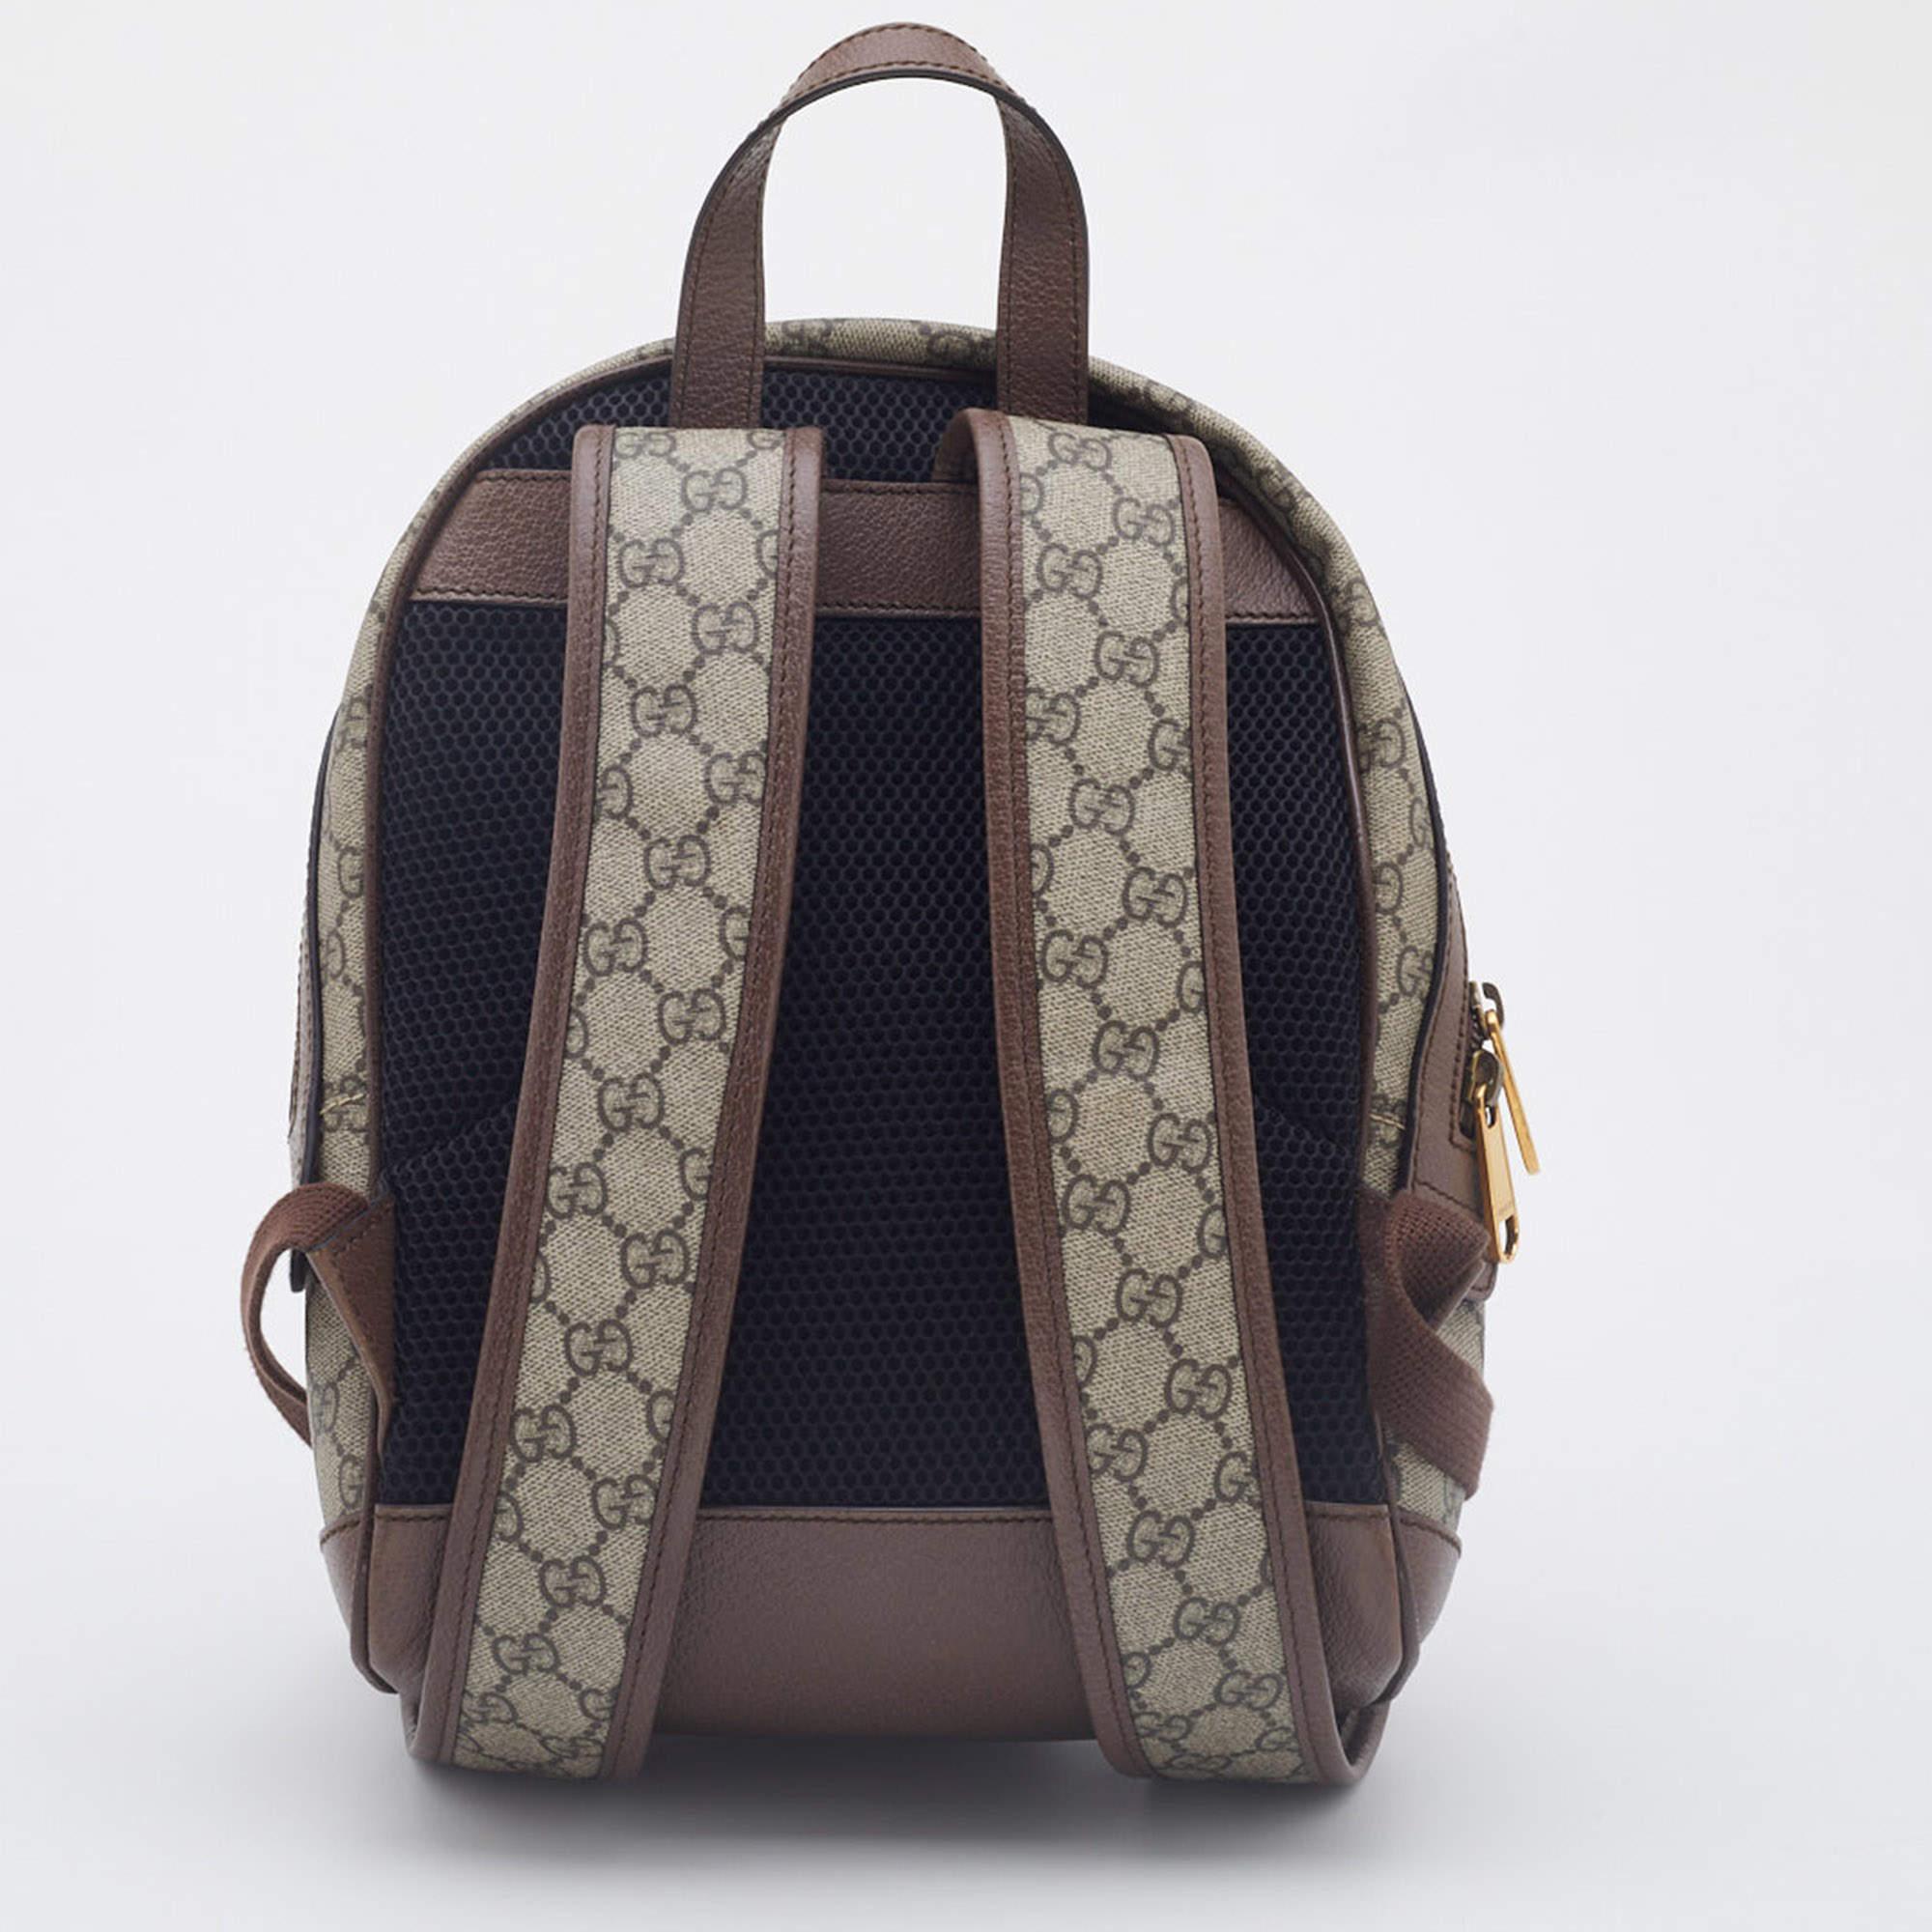 The Gucci x Disney backpack combines iconic luxury with playful charm. Crafted from beige GG Supreme canvas and leather accents, this backpack features a Donald Duck motif on the front pocket. It has a spacious main compartment, adjustable shoulder